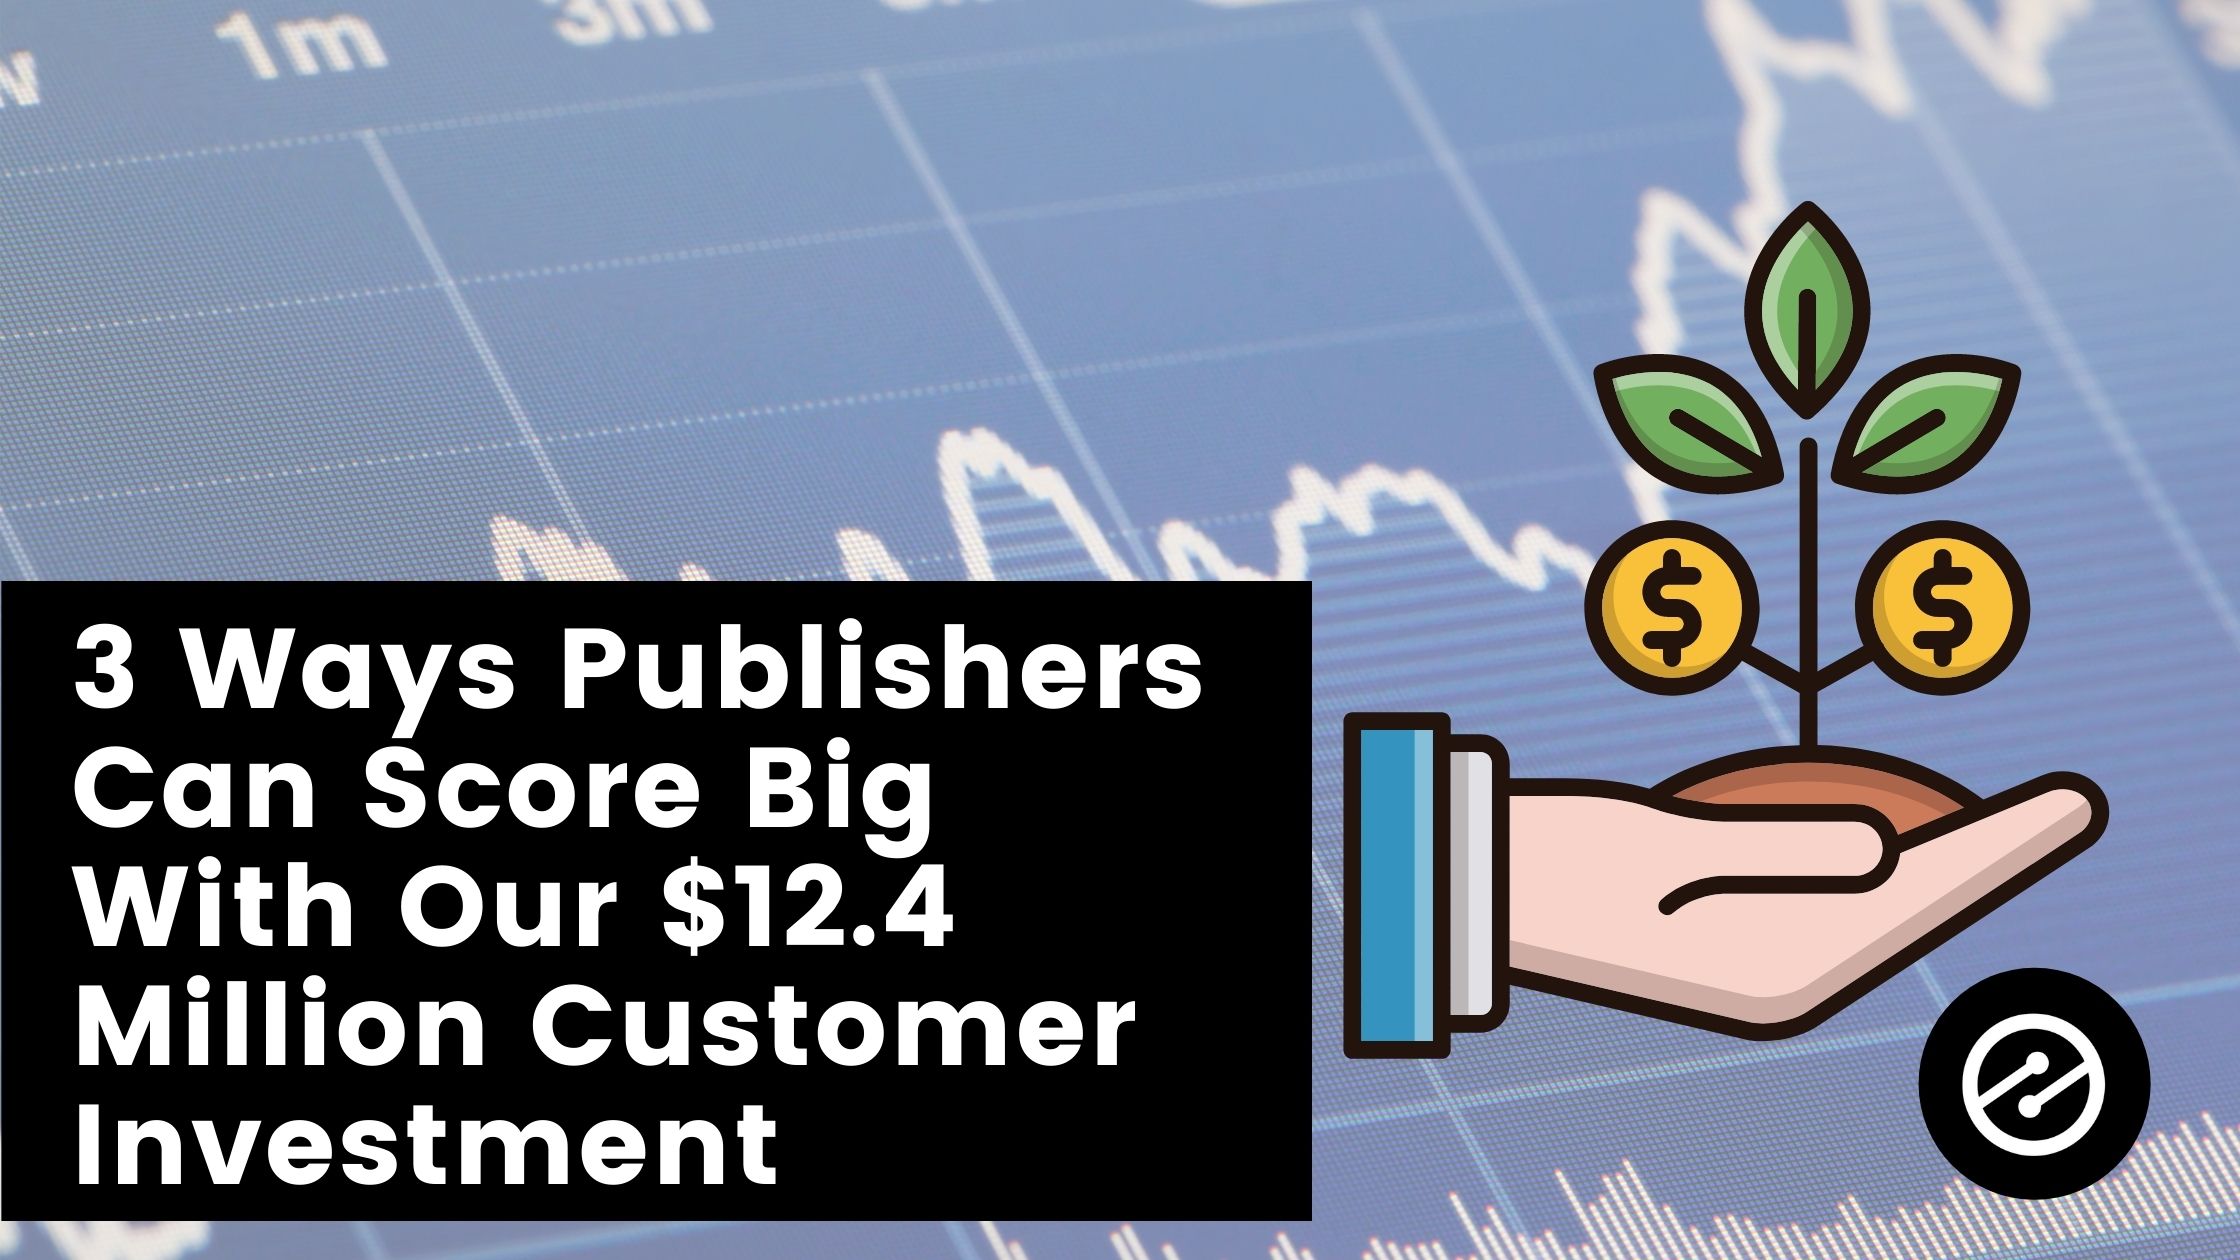 3 Ways Publishers Can Score Big With Our Recent $12.4 Million Customer Investment